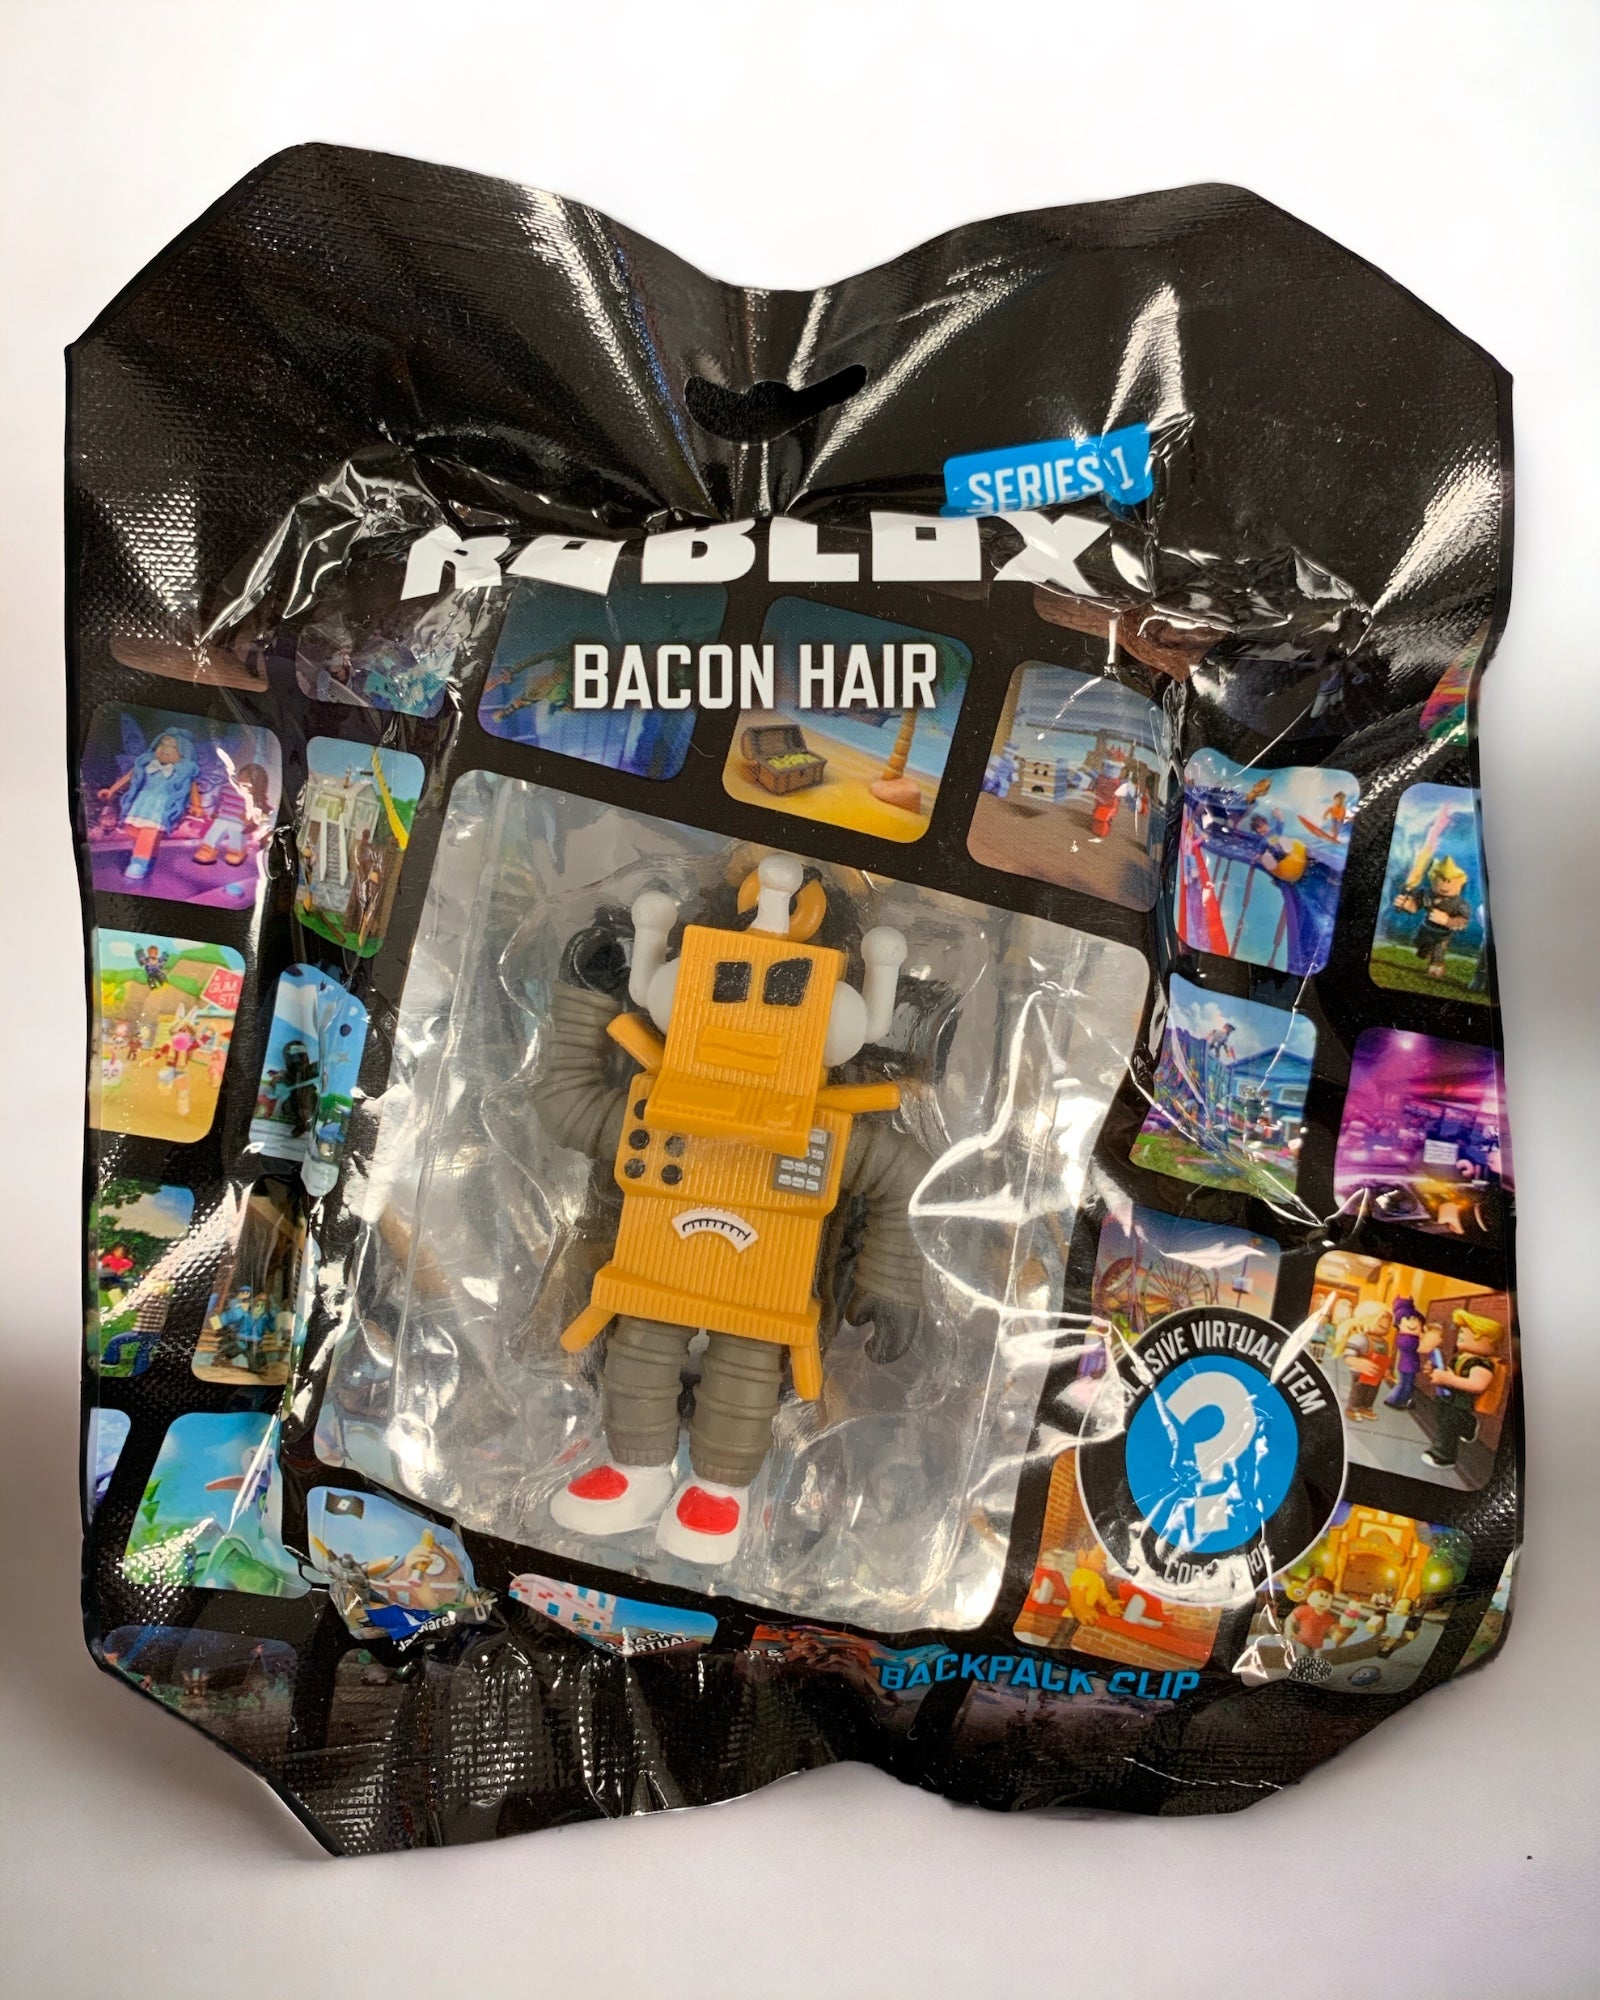 Roblox Series 1 Backpack Hangers - Bacon Hair - Includes mystery virtual item